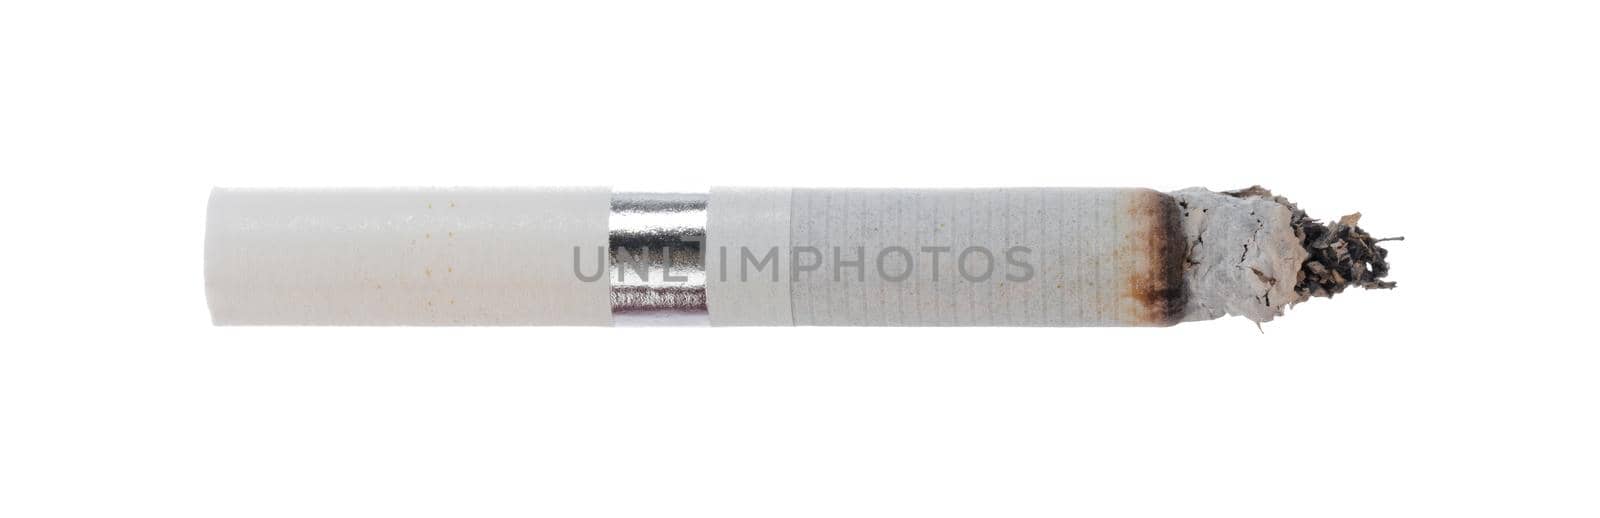 Lit cigarette isolated on white background close up by Fabrikasimf